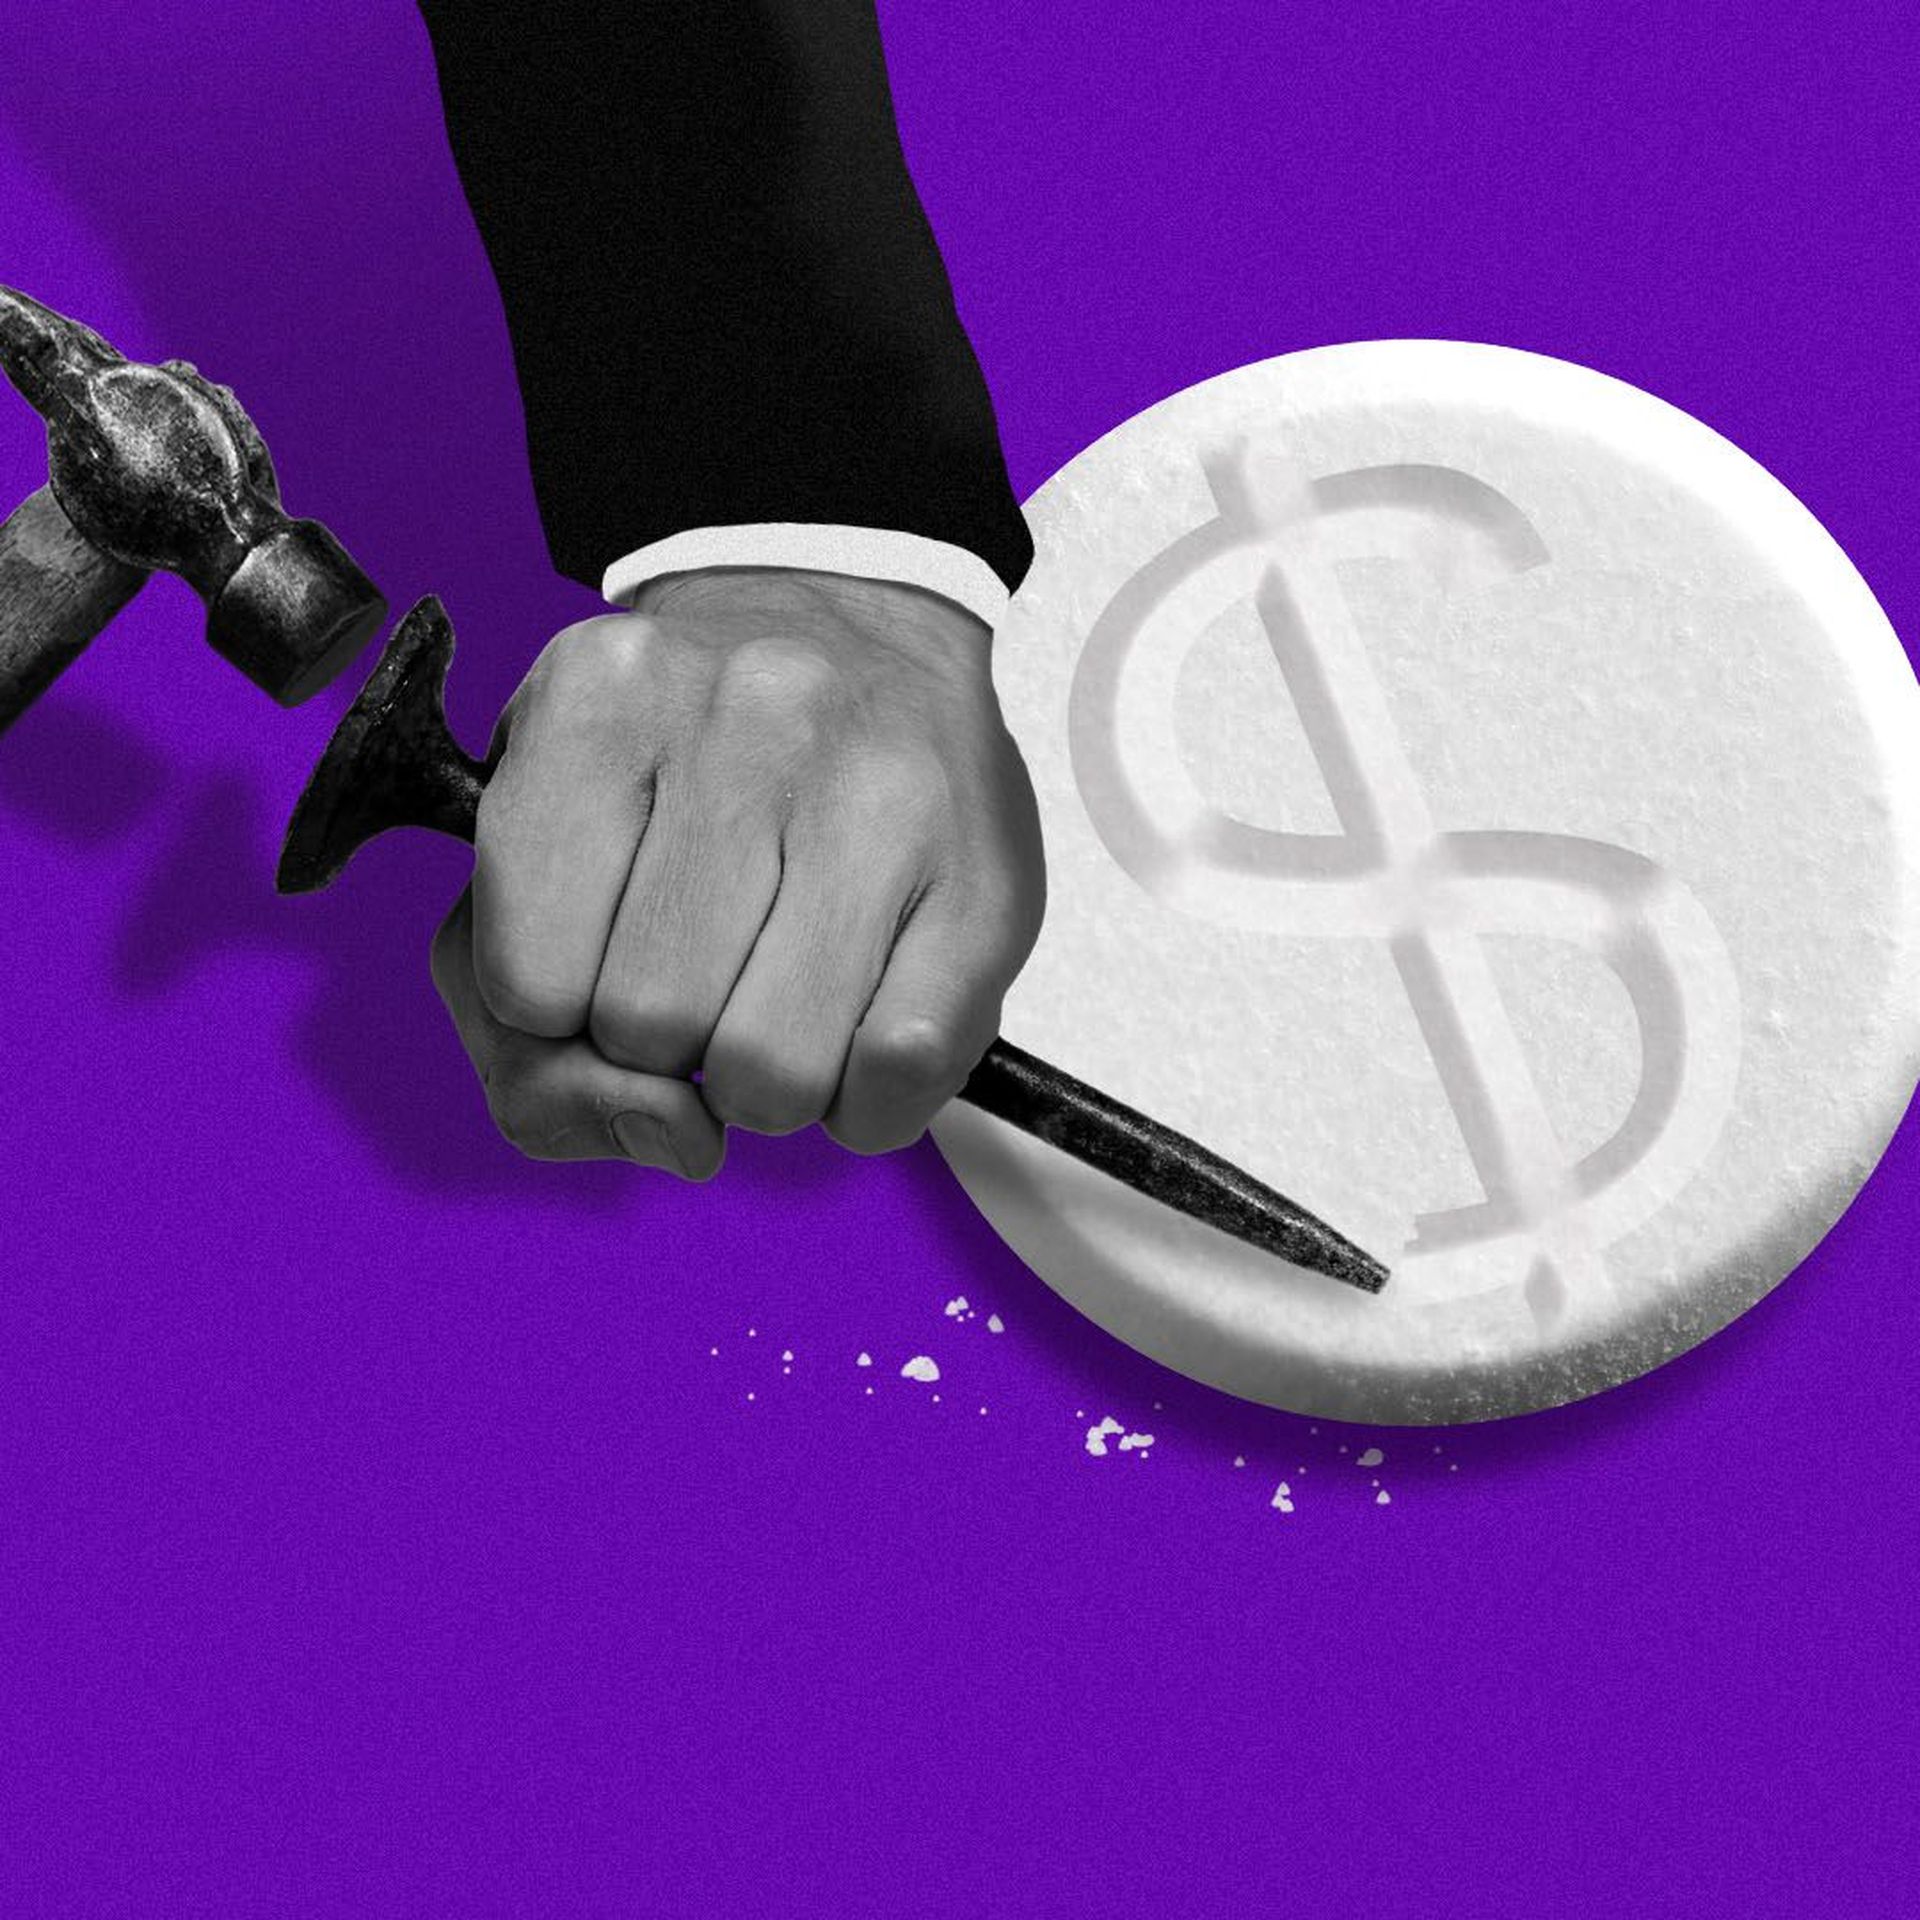 Illustration of hands in a suit chiseling a dollar sign into a pill